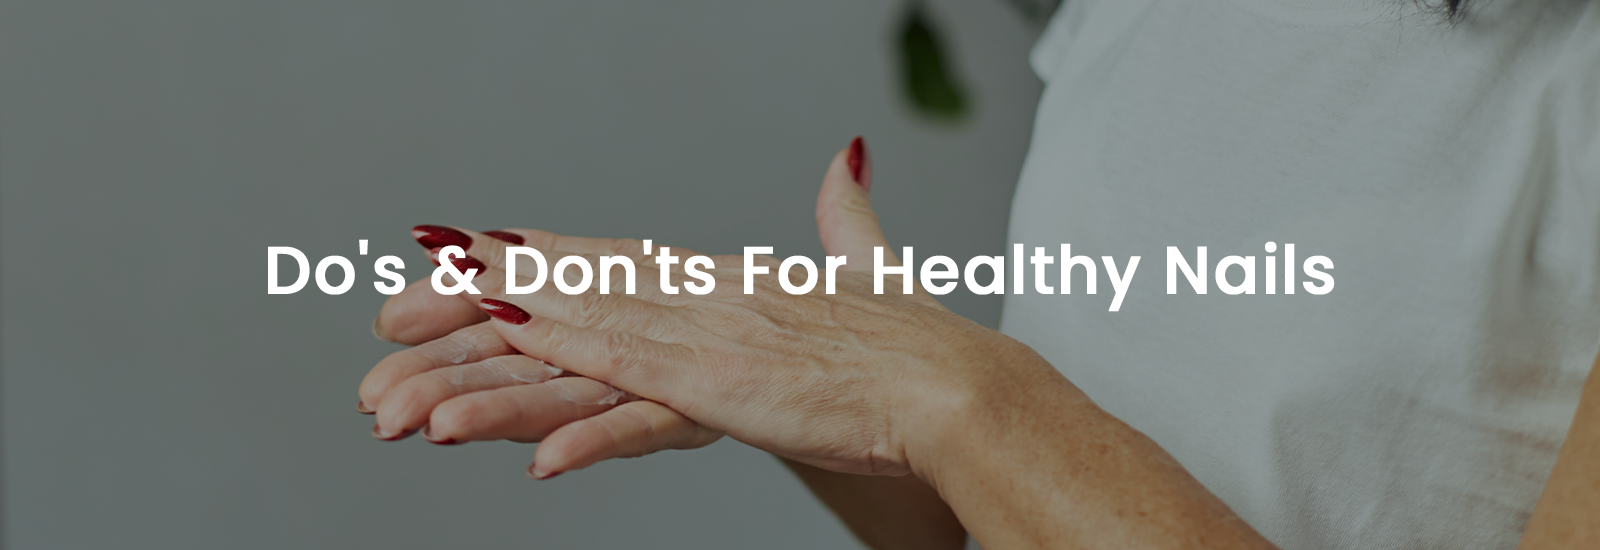 Do's & Dont's For Healthy Nails | Banner Image